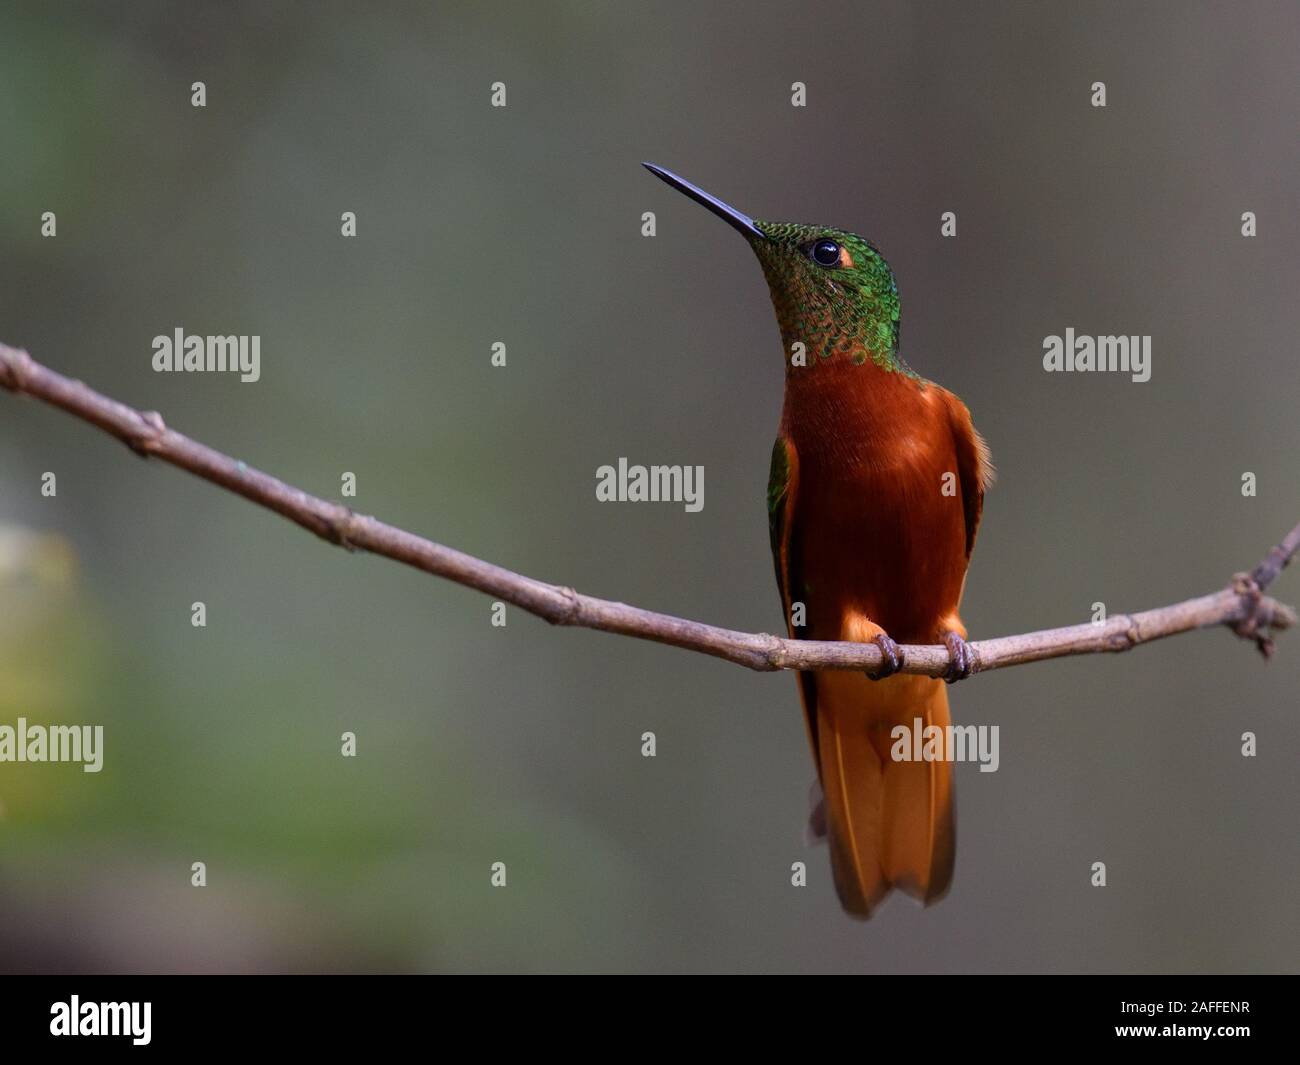 A Chestnut Breasted Coronet hummingbird in Peruvian Cloud forest Stock Photo